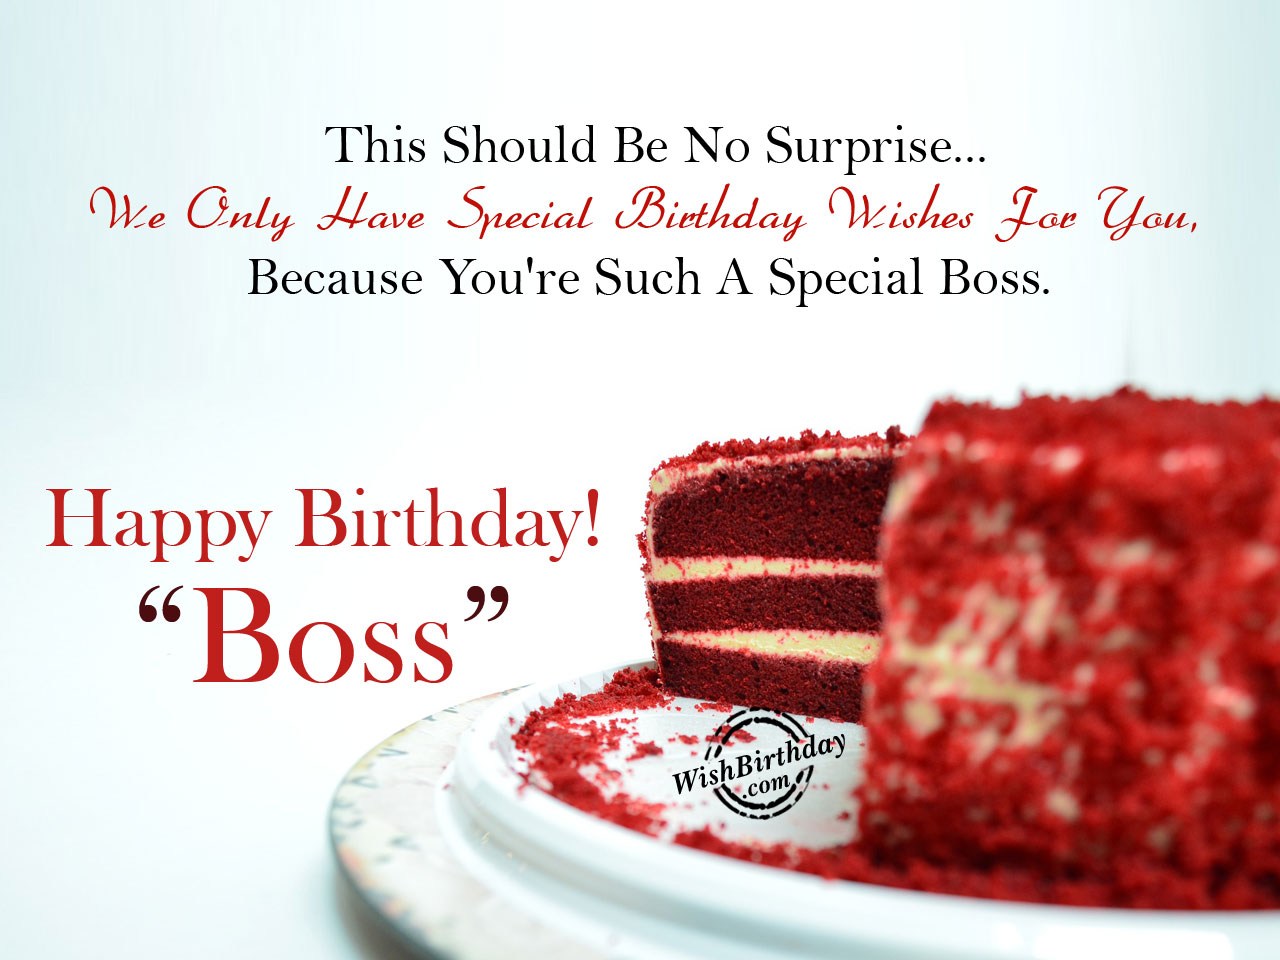 Birthday Wishes For Boss - Birthday Images, Pictures